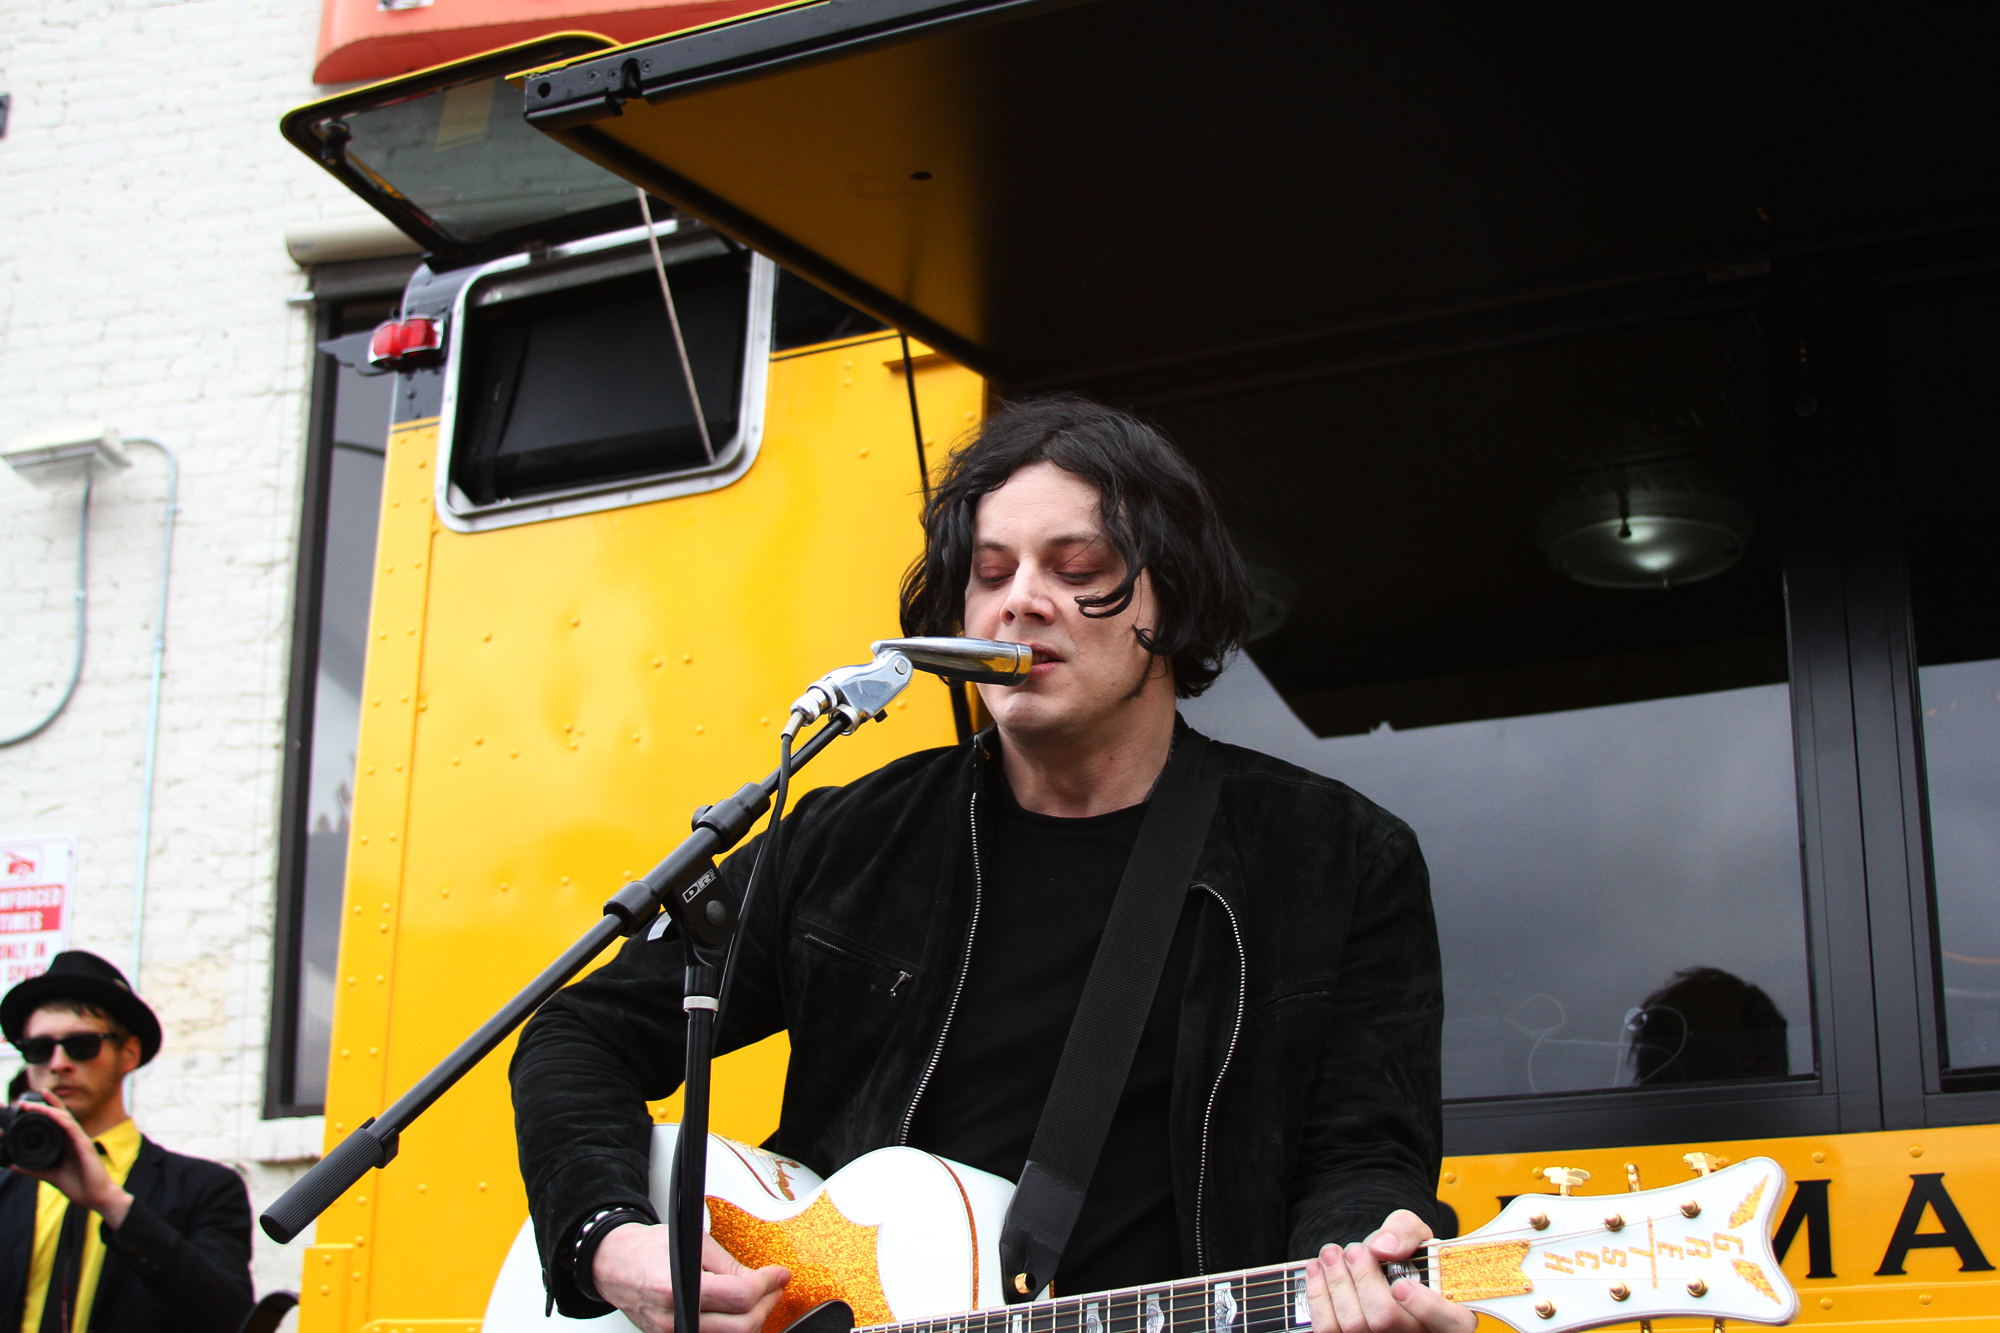 Jack White performs at the Third Man Records Rolling Record Store during South By Southwest in Austin, Texas on March 16, 2011.